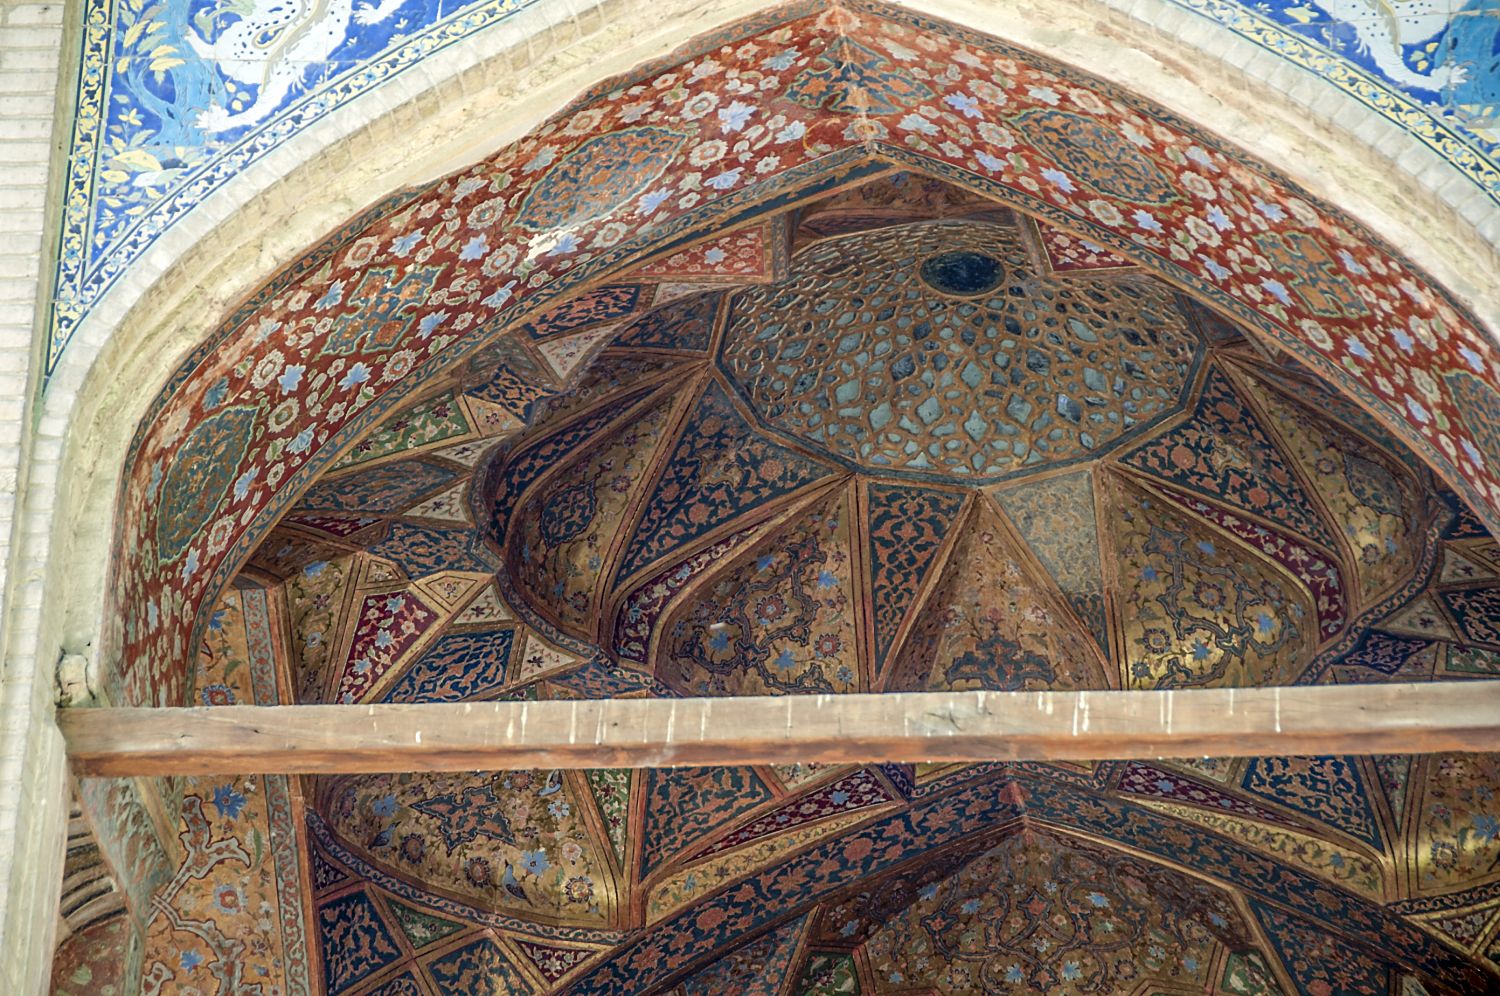 North facade, view into arched opening of a second story gallery flanking the large portico to the west, showing ornately painted muqarnas vault and tile spandrels.